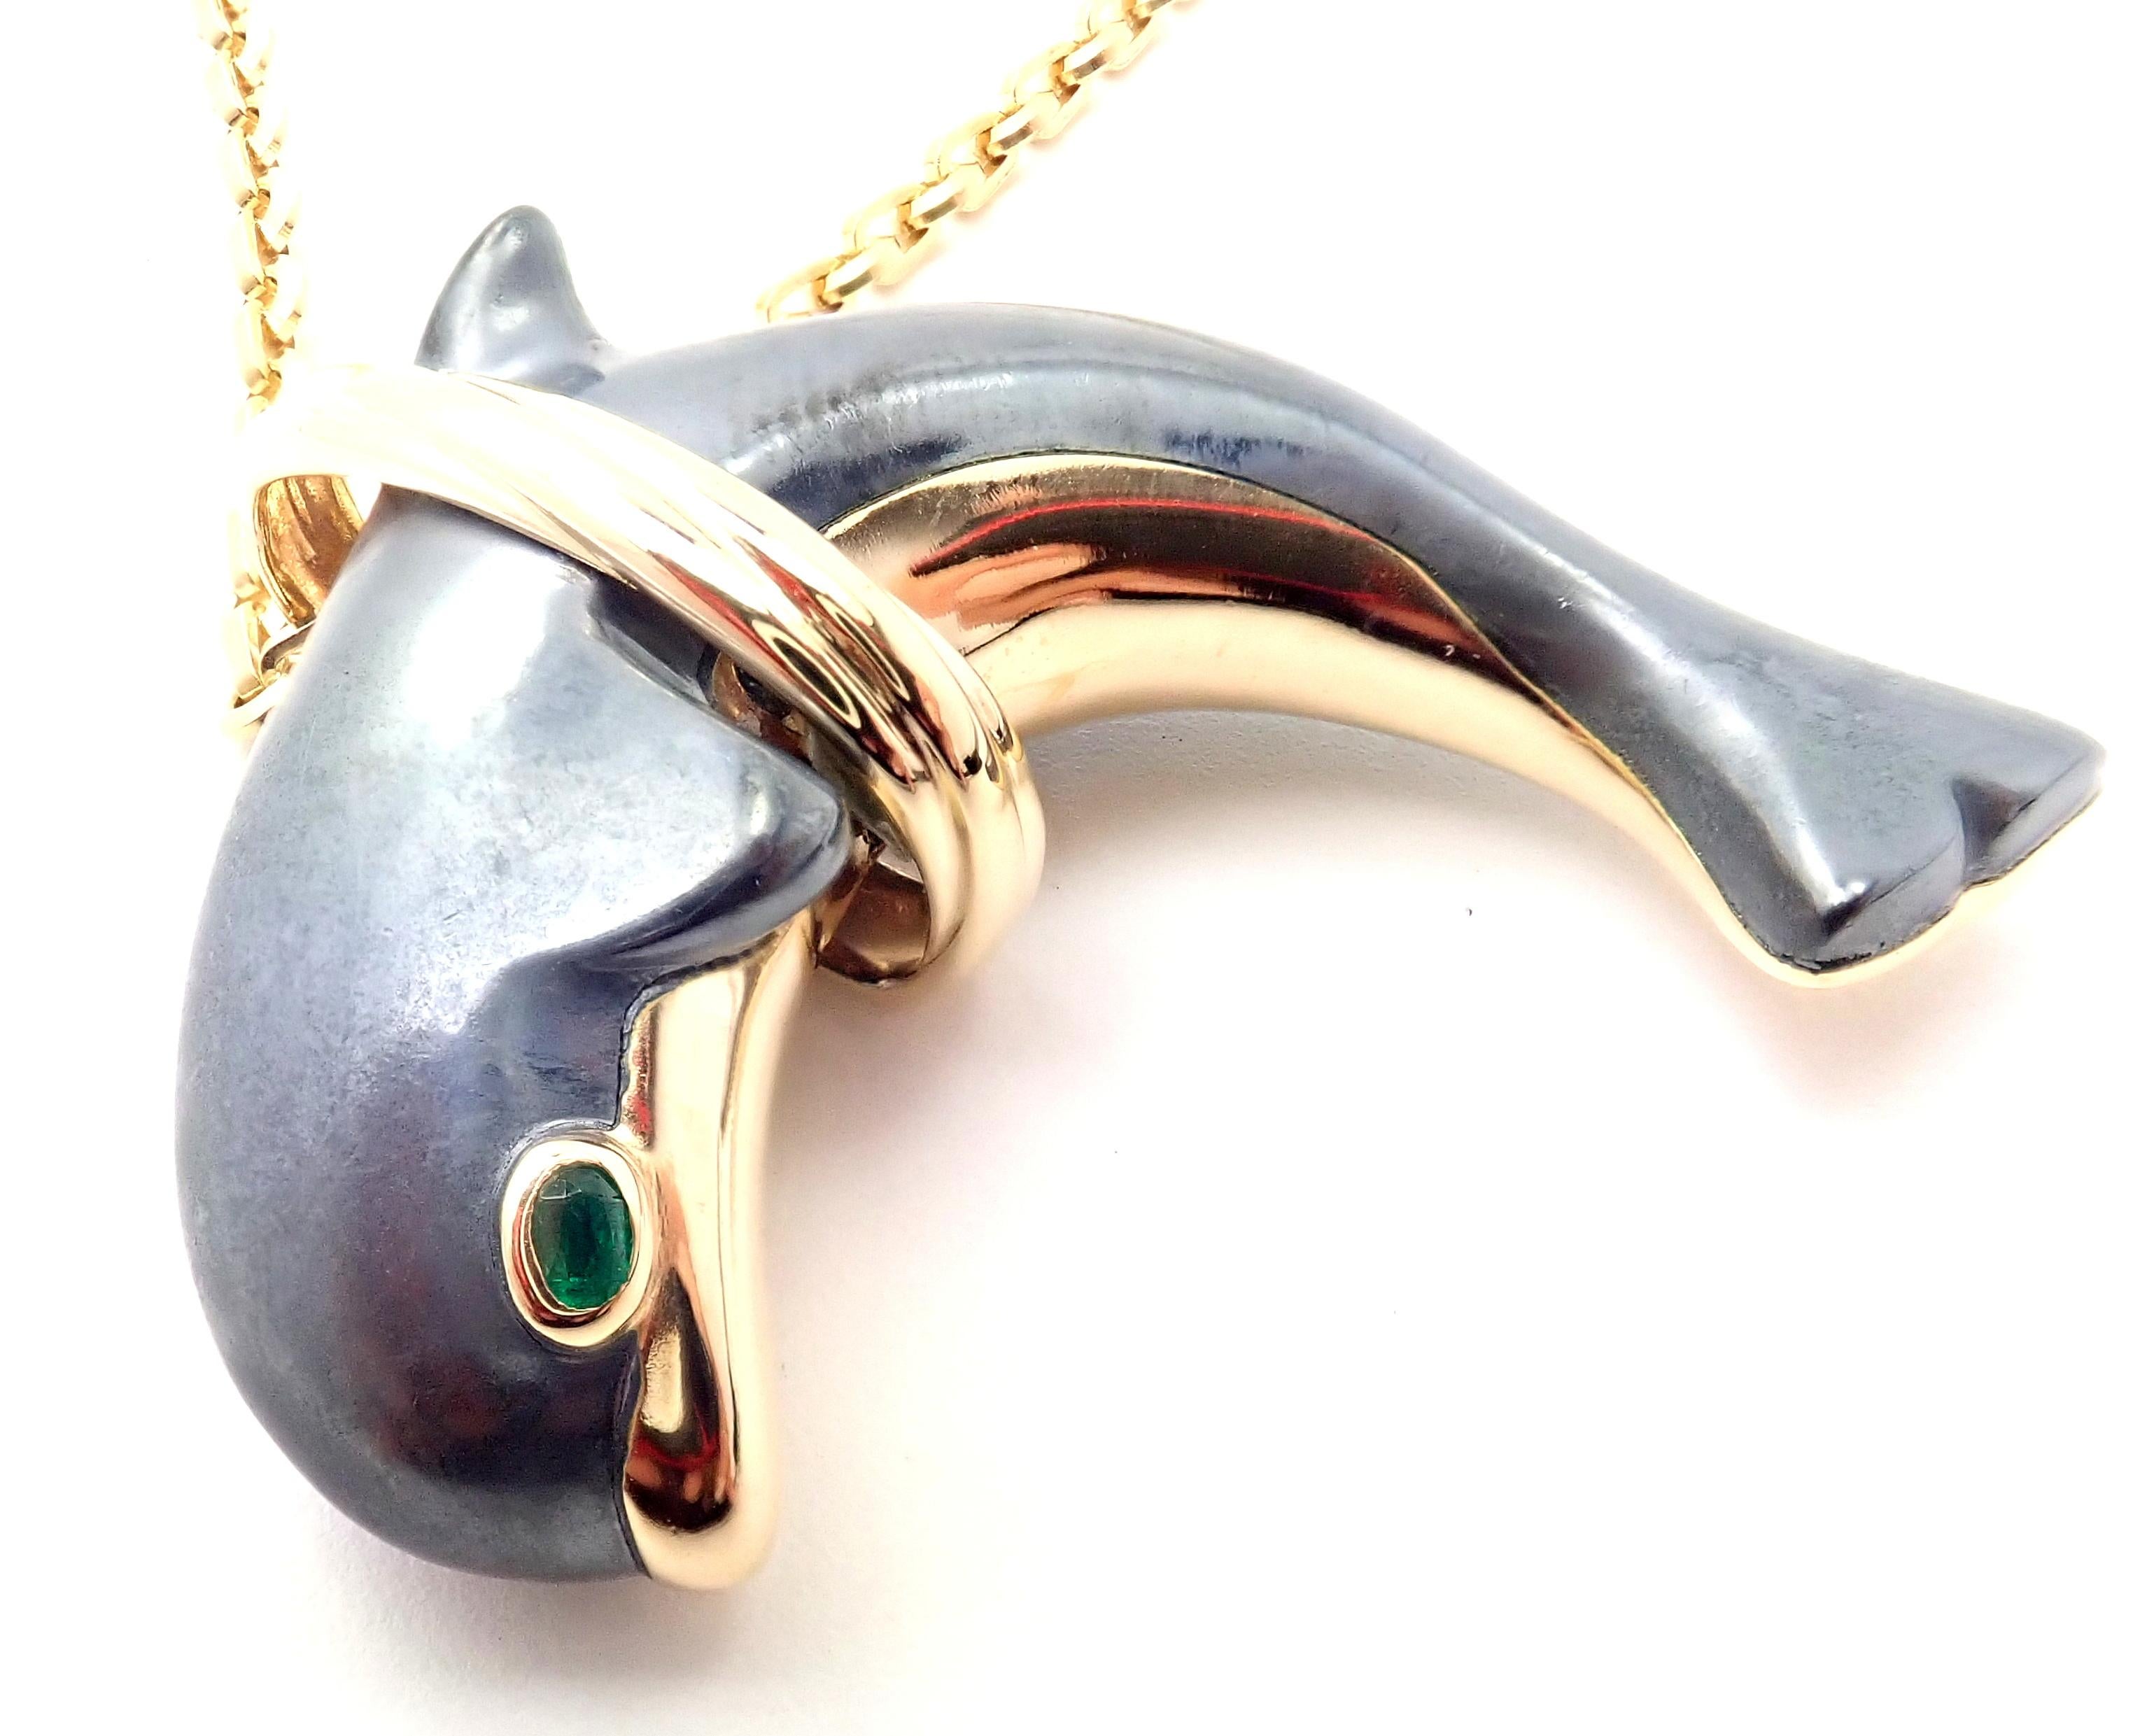 Cartier Hematite Dolphin Yellow Gold Pendant Link Necklace In Excellent Condition For Sale In Holland, PA